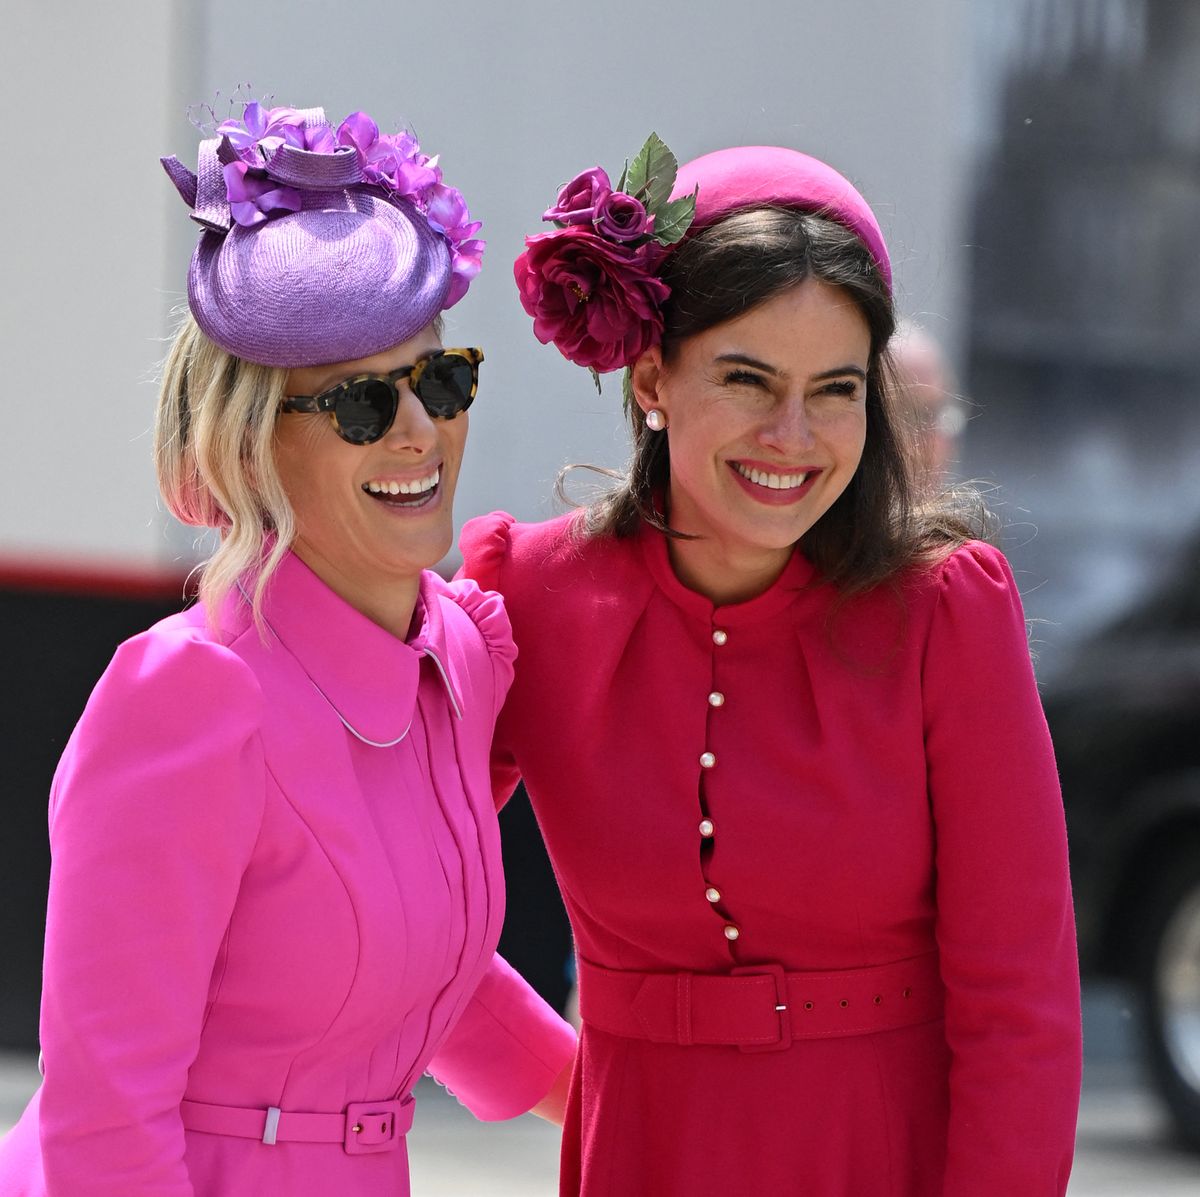 Zara Tindall and Sophie Winkleman Both Wore Vibrant Shades of Pink at the  Service of Thanksgiving